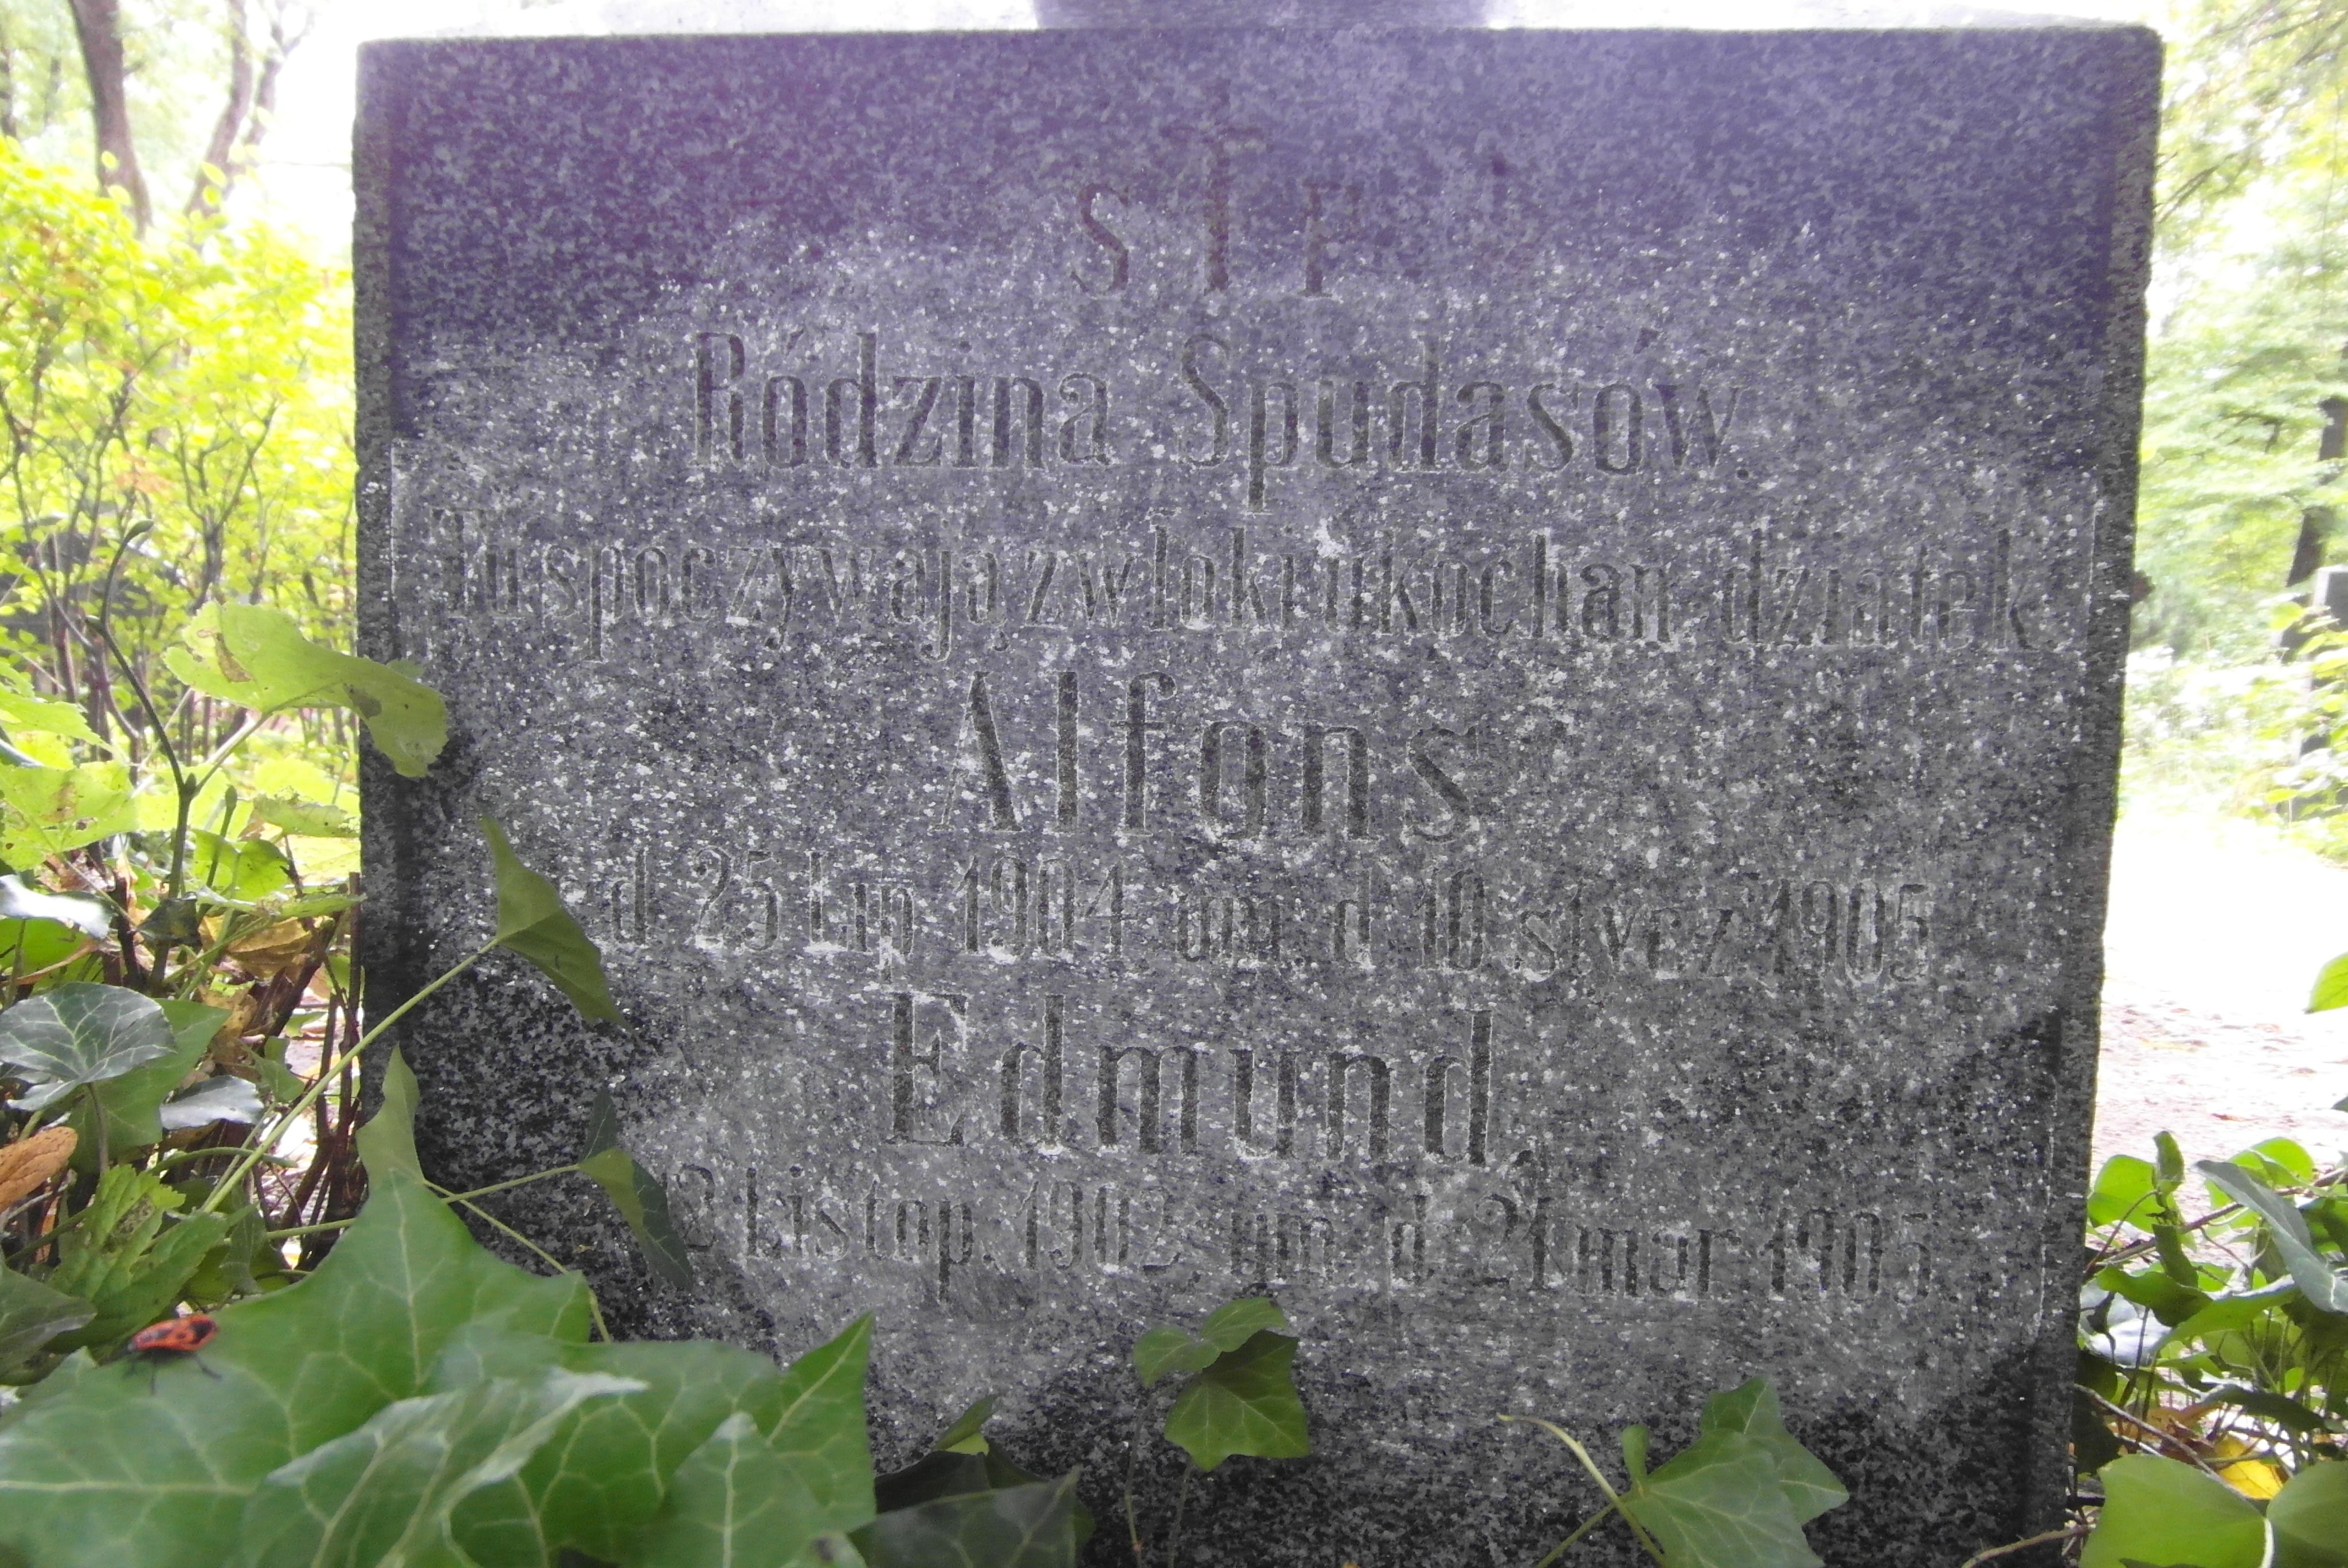 Inscription from the tombstone of the Spudasov family, St Michael's cemetery in Riga, as of 2021.